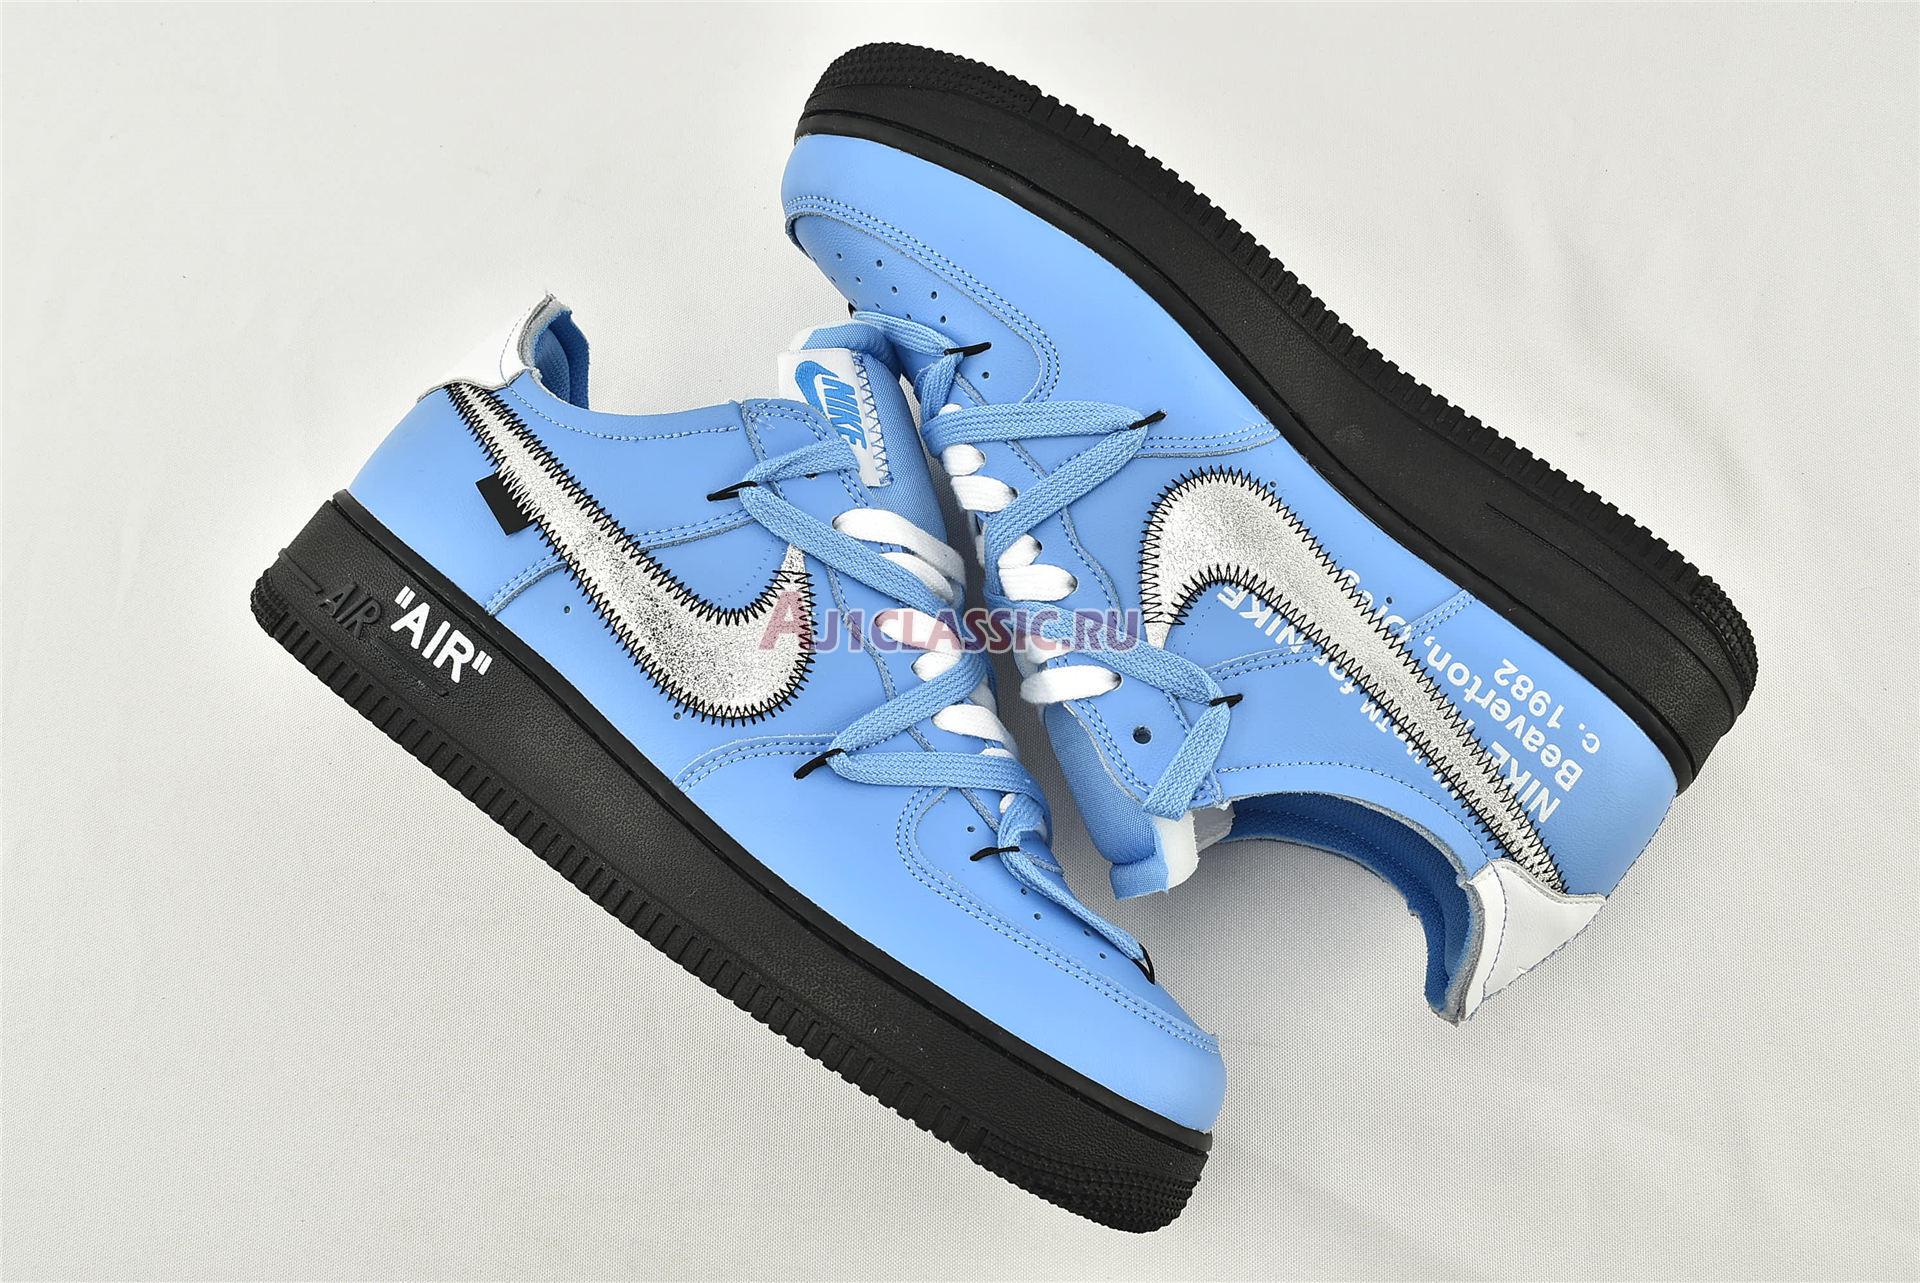 Off-White x Nike Air Force 1 Low "MCA" CK0866-401